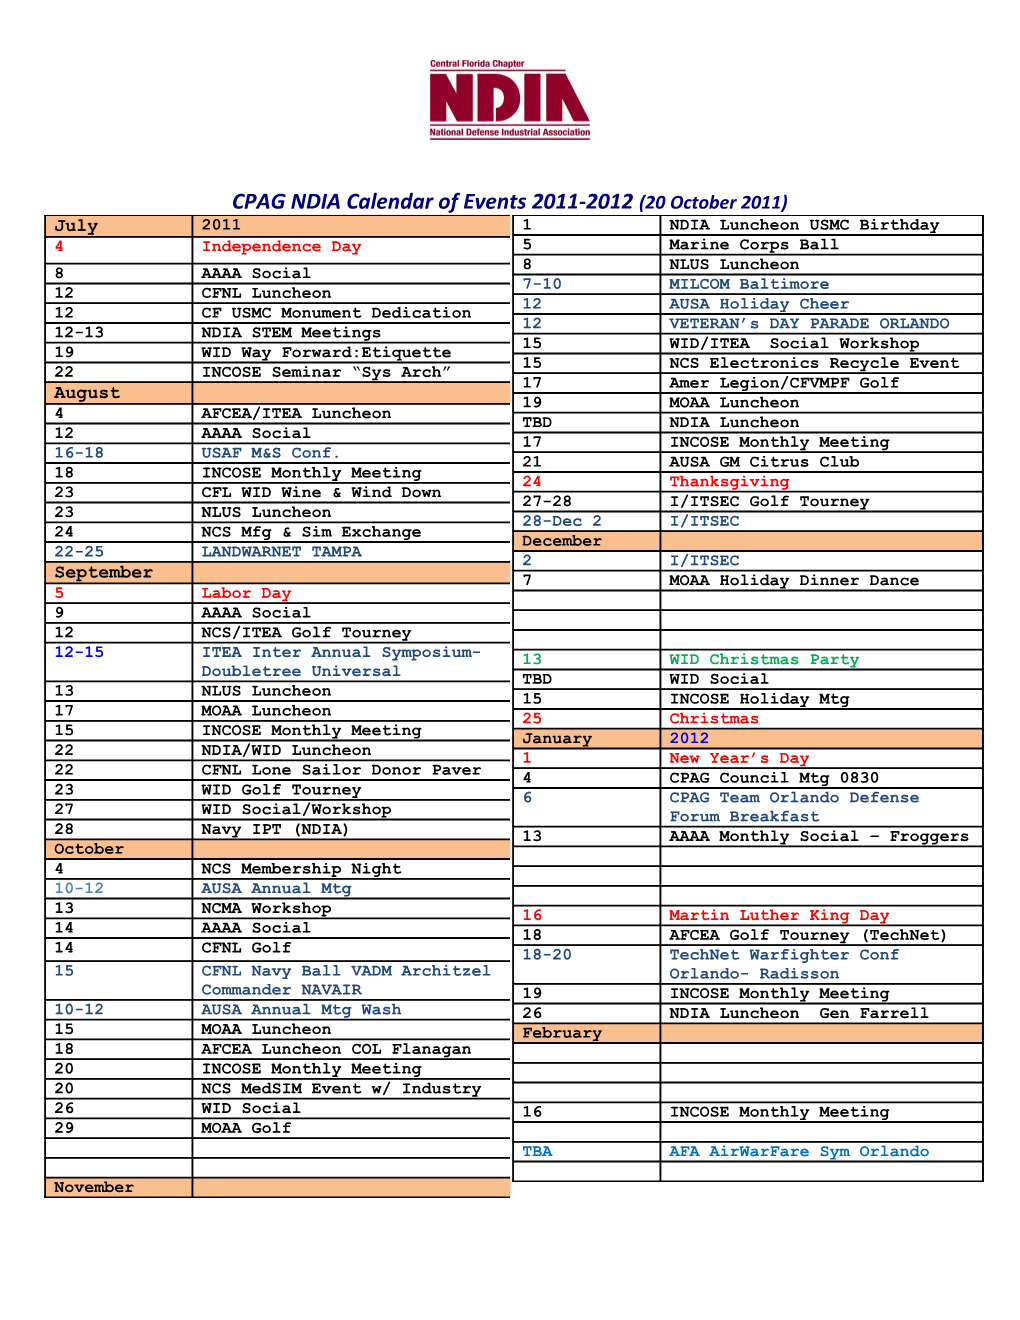 CPAG NDIA Calendar of Events 2011-2012 (20 October 2011)